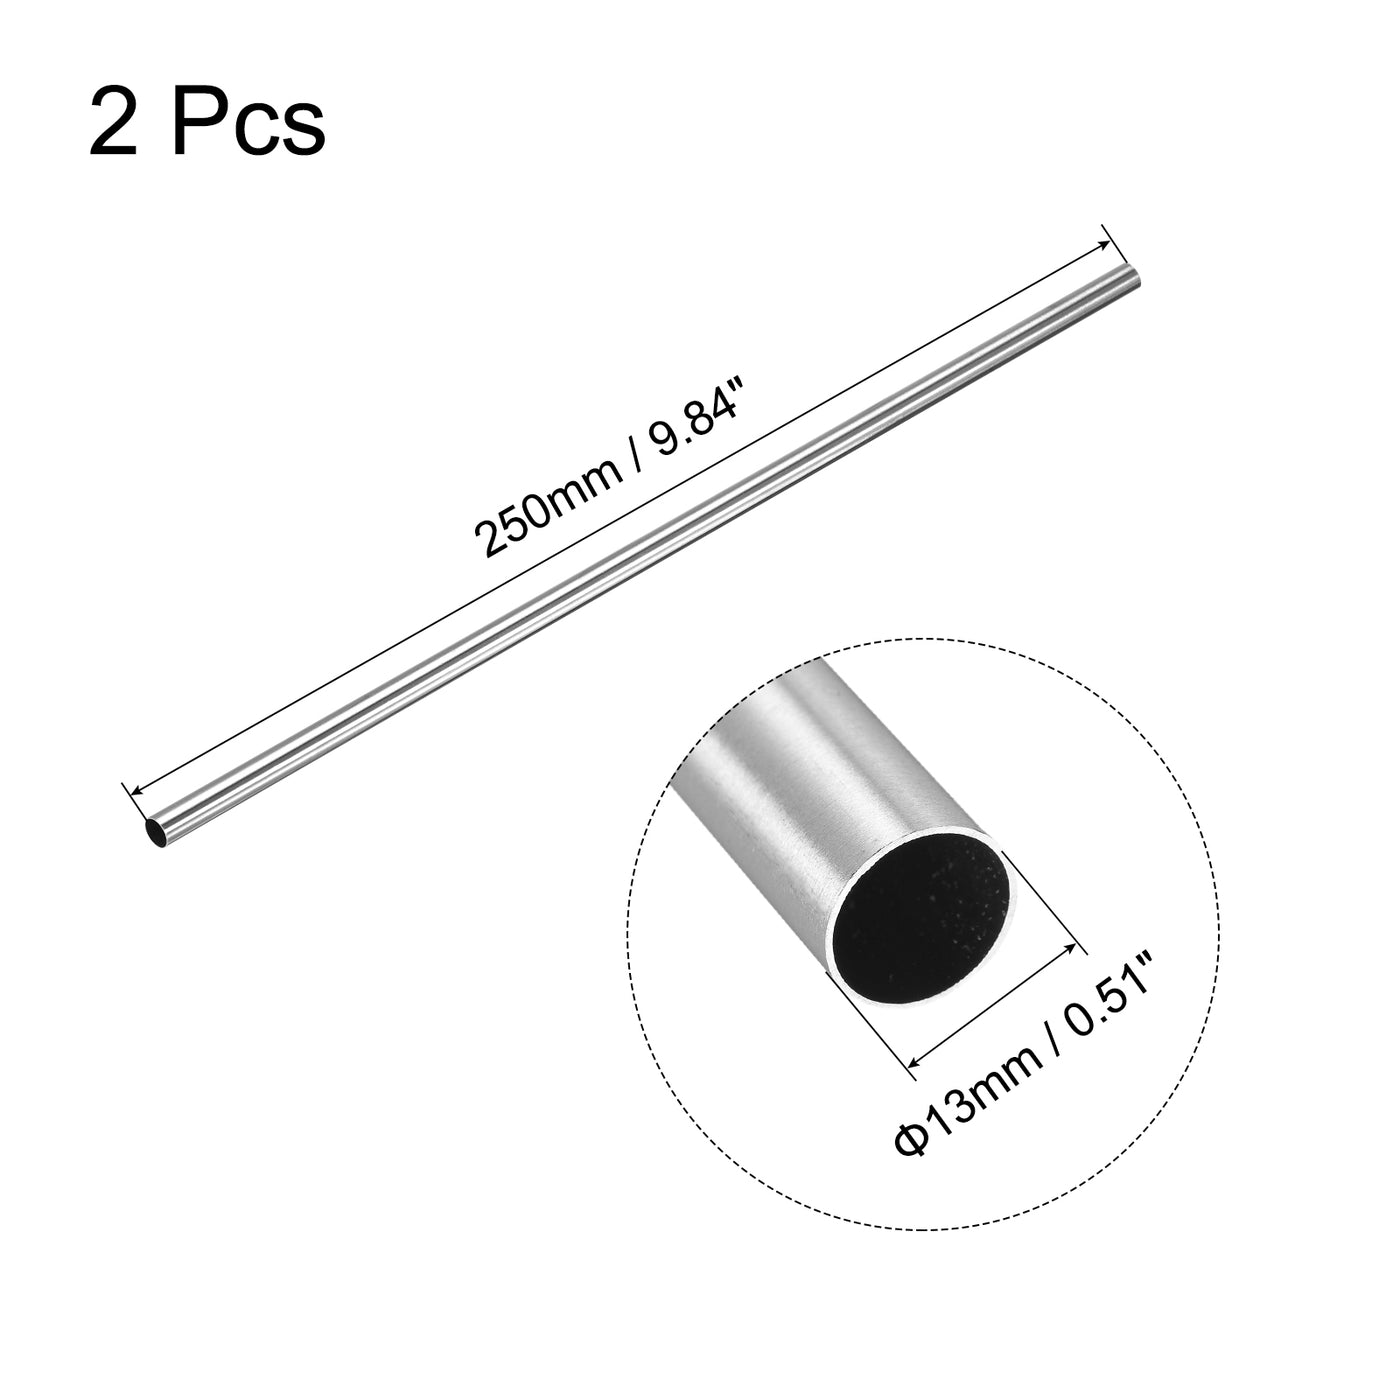 Uxcell Uxcell 304 Stainless Steel Round Tube 13mm OD 0.5mm Wall Thickness 250mm Length 2 Pcs